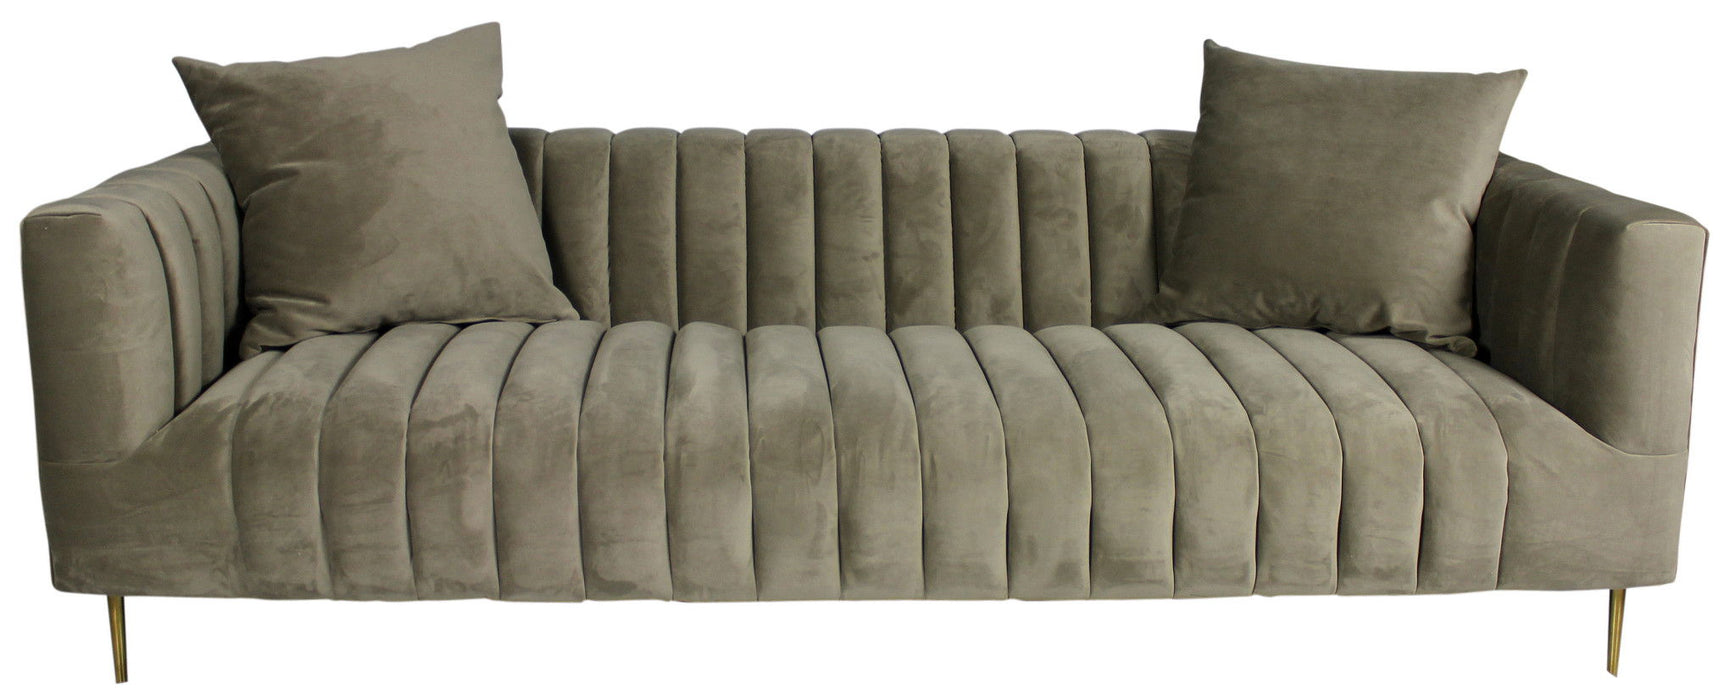 Sofa And Toss Pillows 90" - Gray Brown Velvet And Gold